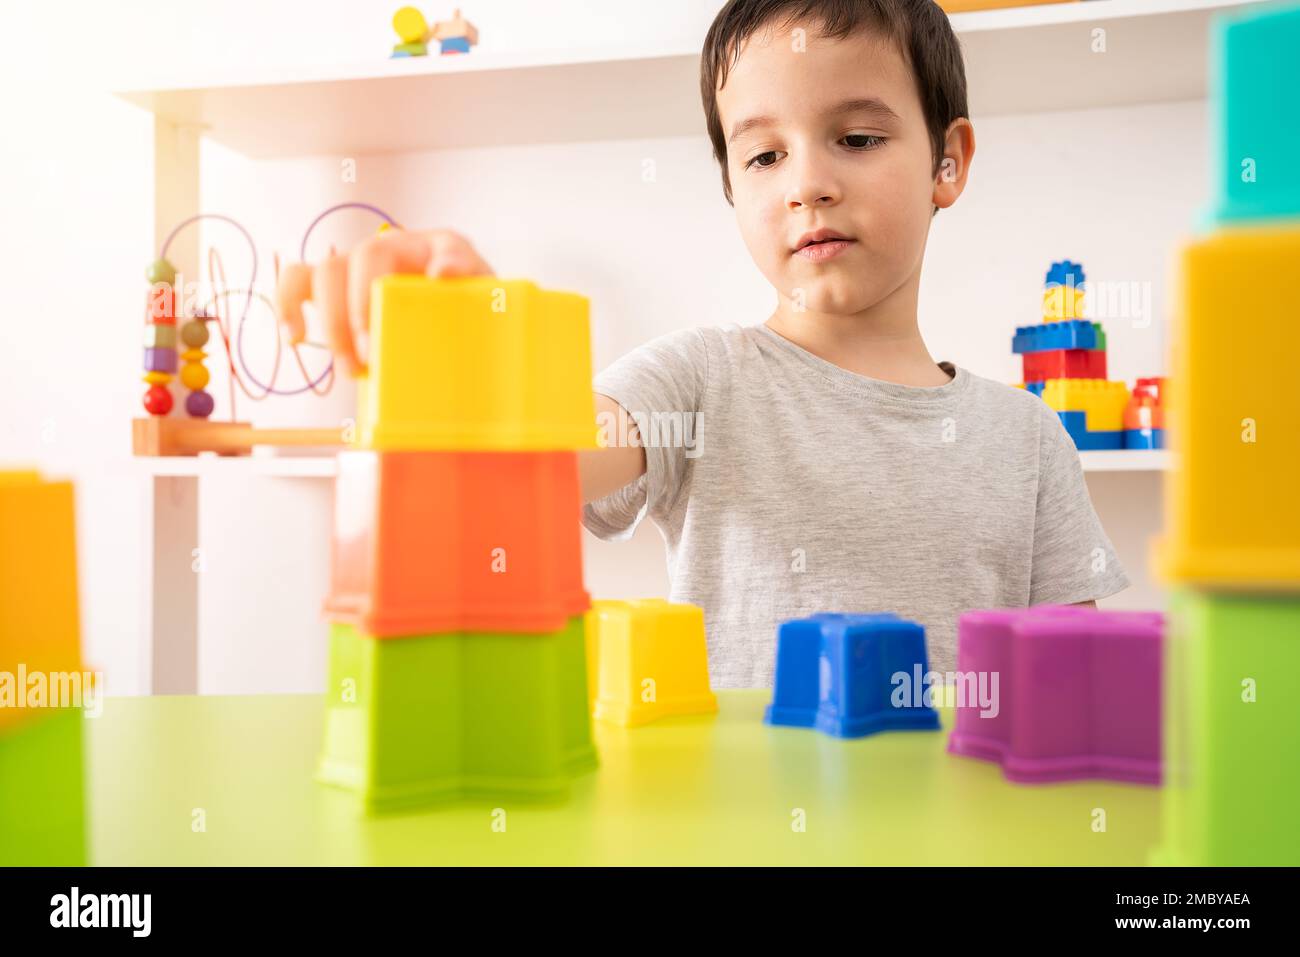 An interested pre-school child building something with plastic blocks. Stock Photo